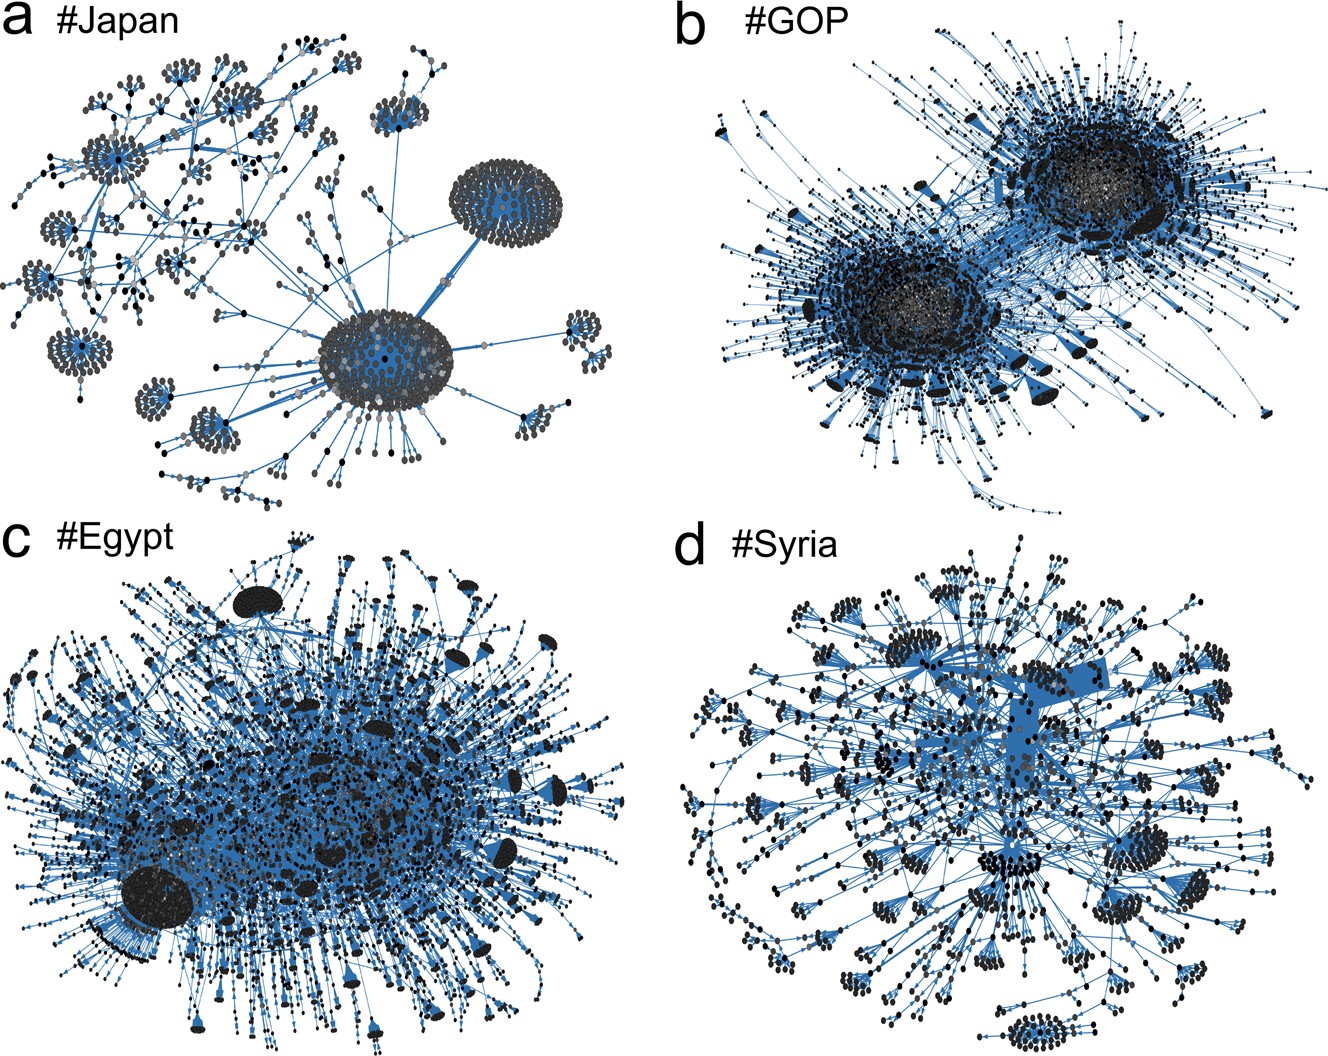 Figure 1: Visualizations of meme diffusion networks for different topics. Nodes represent Twitter users, and directed edges represent retweeted posts that carry the meme. The brightness of a node indicates the activity (number of retweets) of a user, and the weight of an edge reflects the number of retweets between two users.